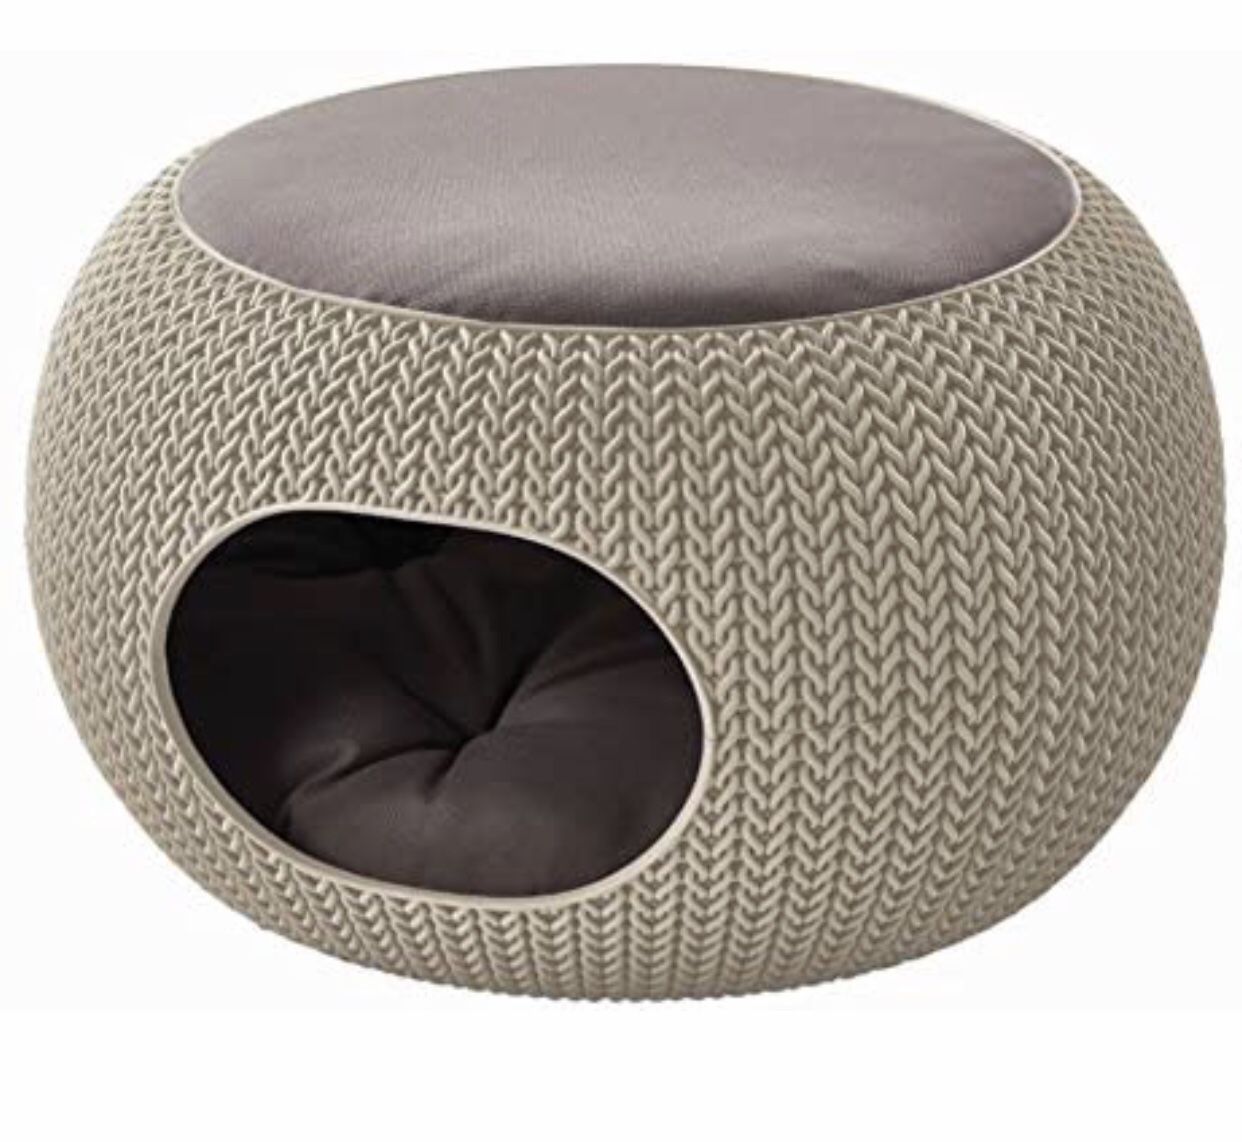 Keter Pets Knit Cozy Pet Home, Luxury Lounge Bed & Pet Home with Cushions, Sandy Beige